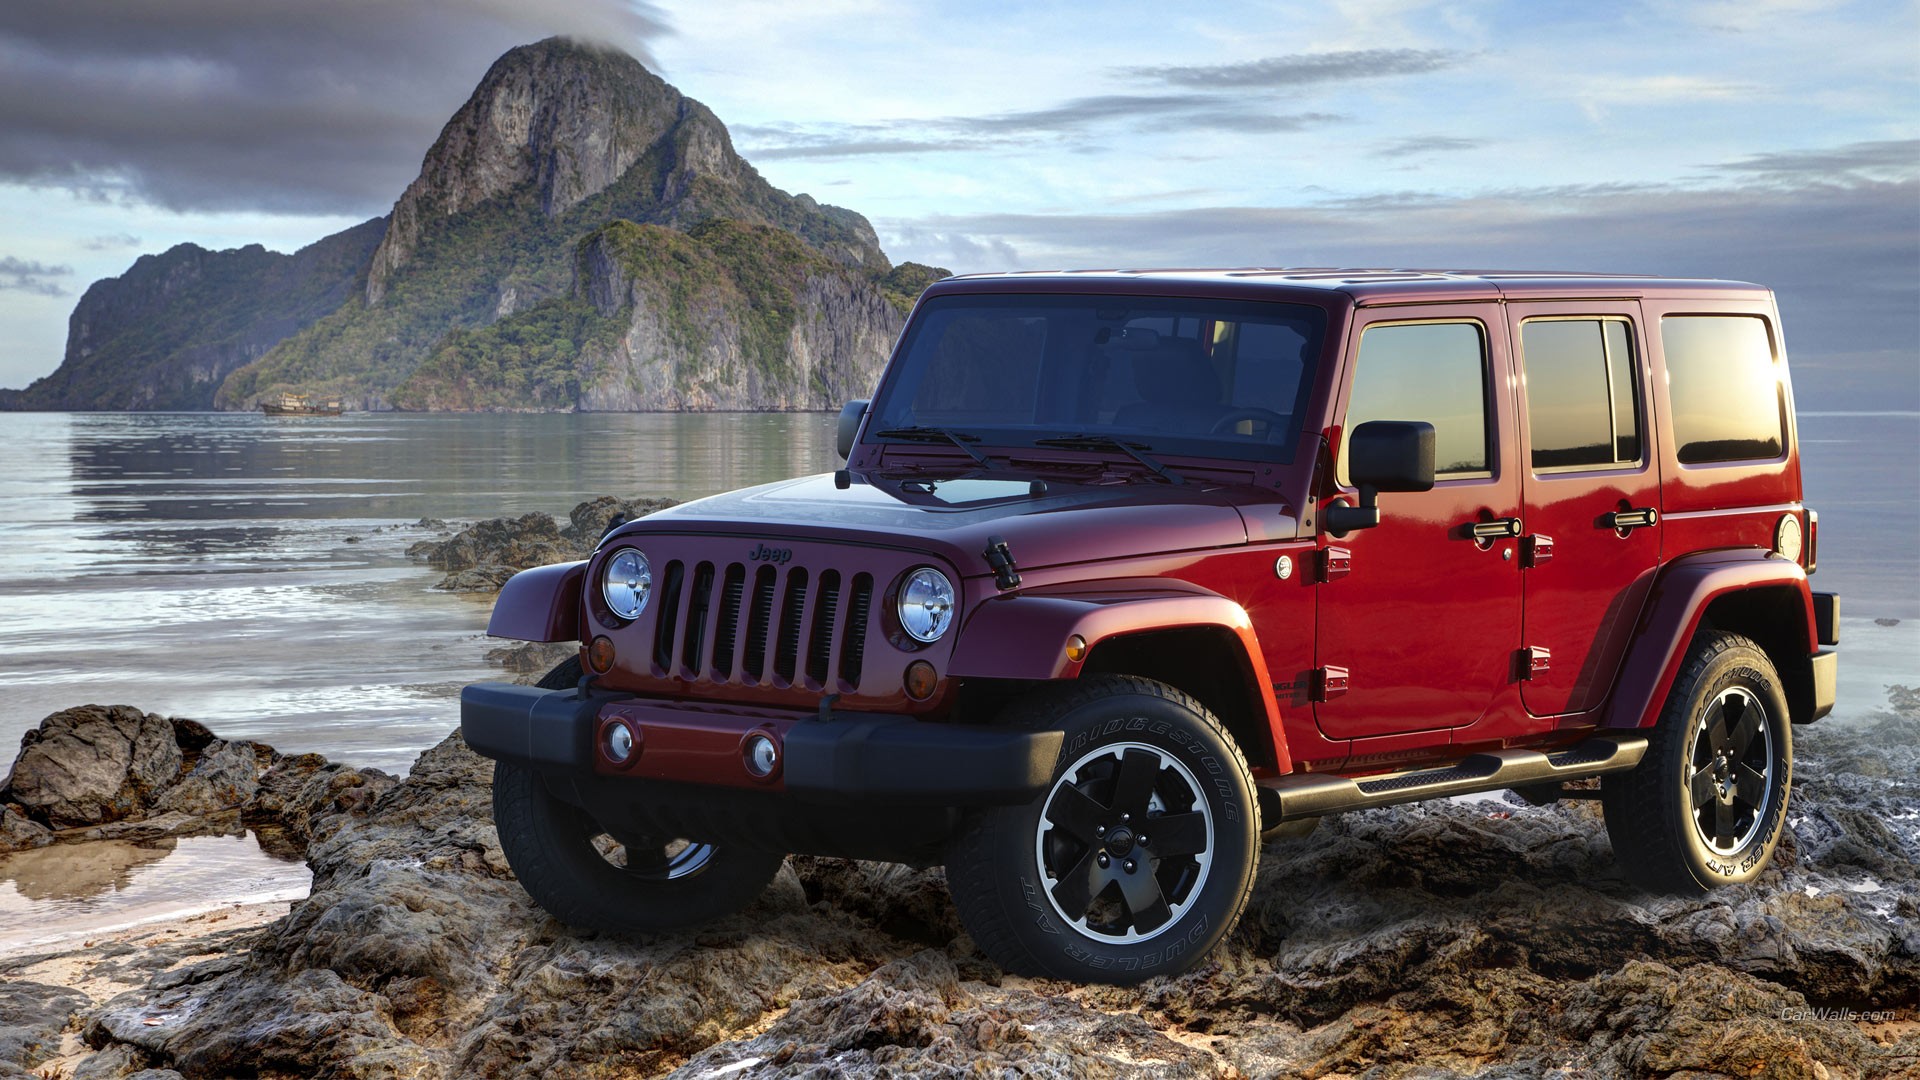  Jeep  Wrangler Wallpapers  HD Desktop and Mobile Backgrounds 